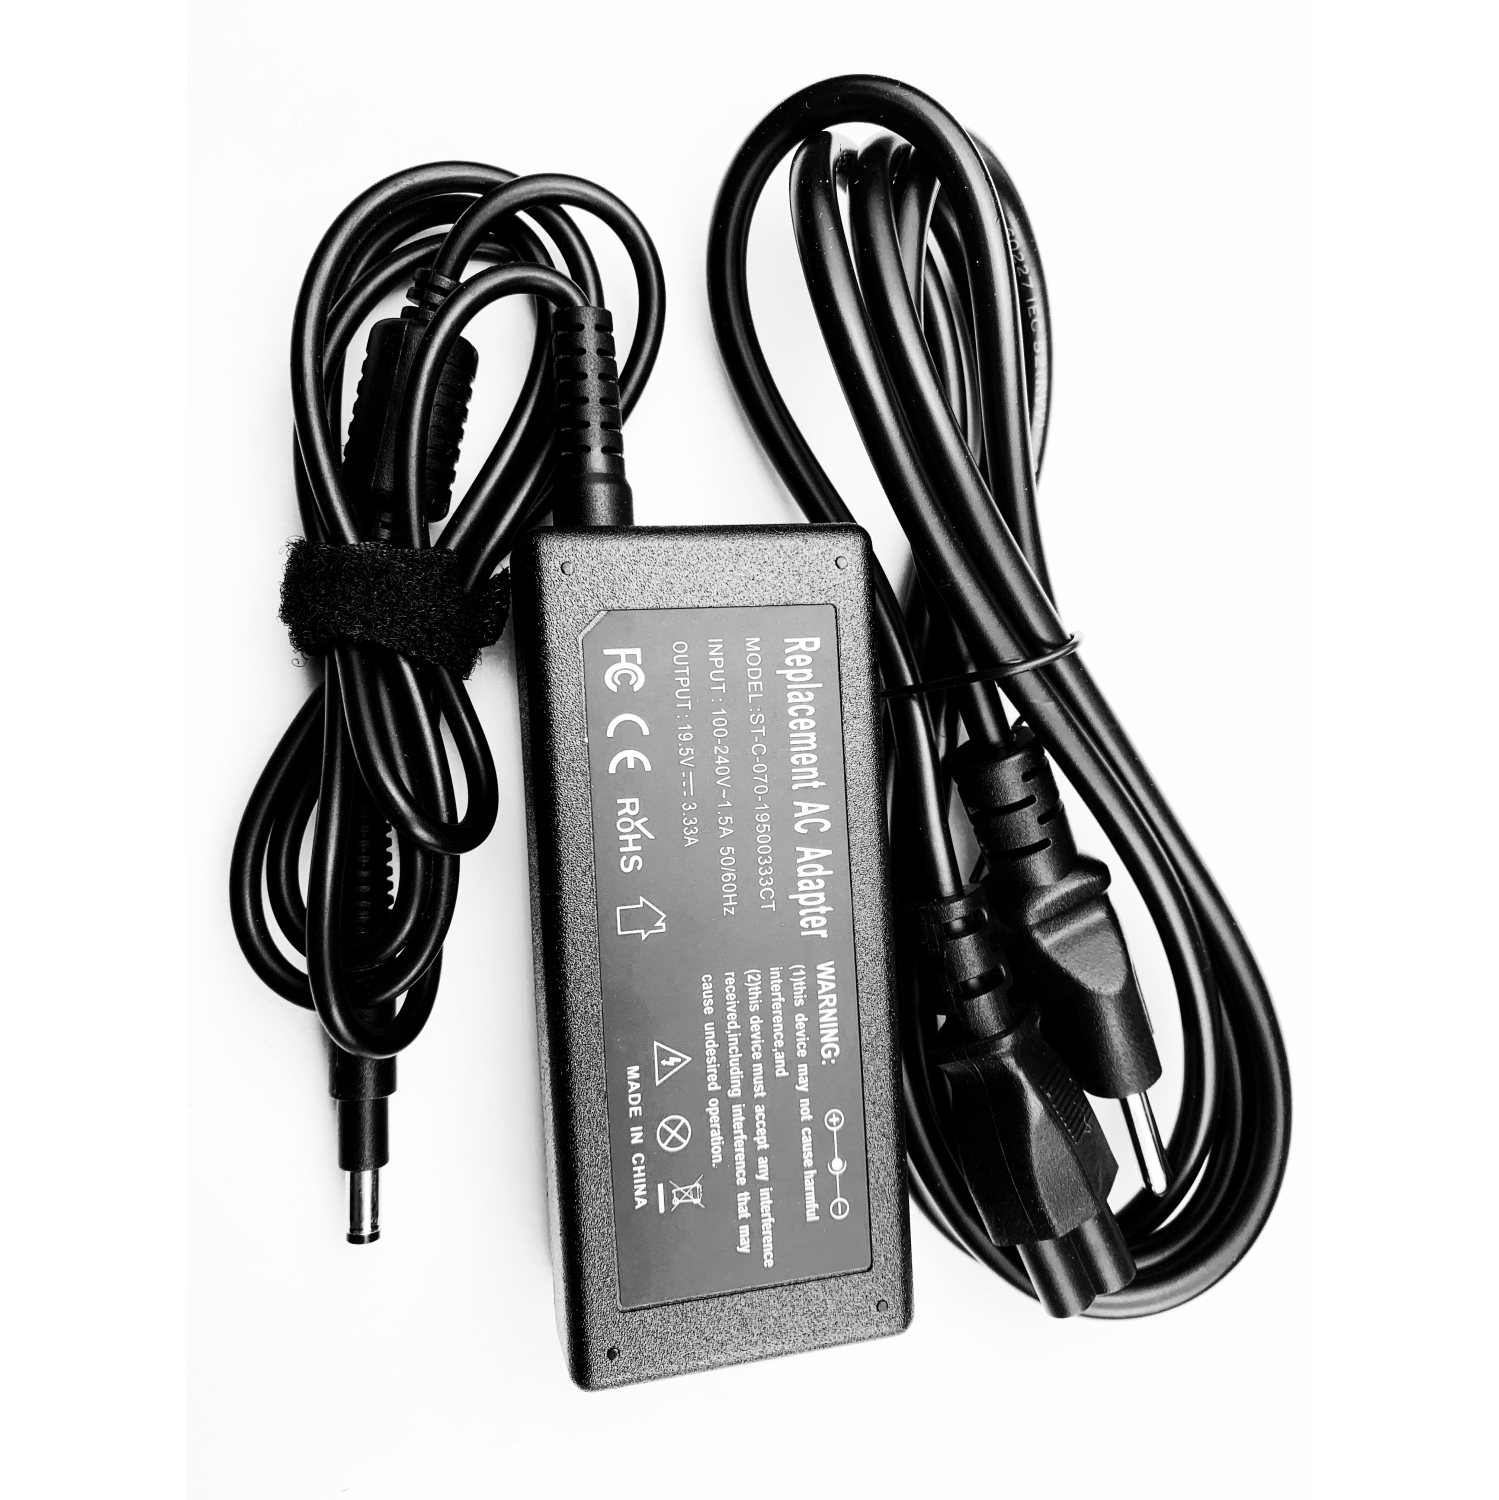 19.5V 65W 4.75mm x 1.7mm new AC adapter power cord charger for HP C2K04UA C2N00UA New